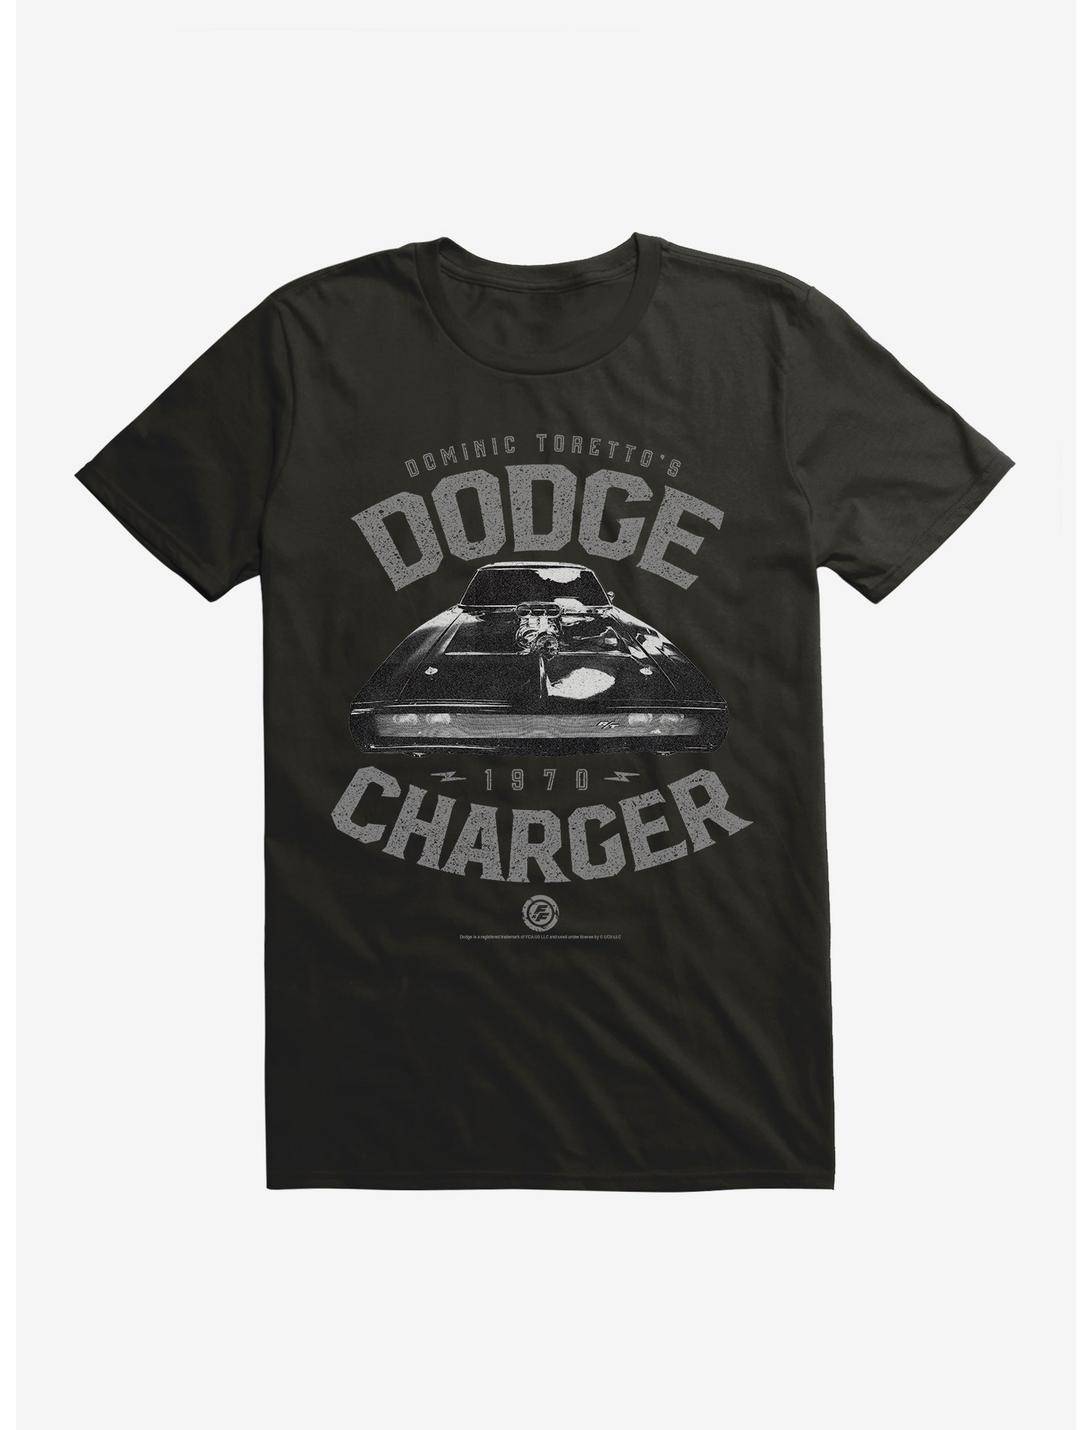 Fast & Furious Toretto's Charger T-Shirt, BLACK, hi-res